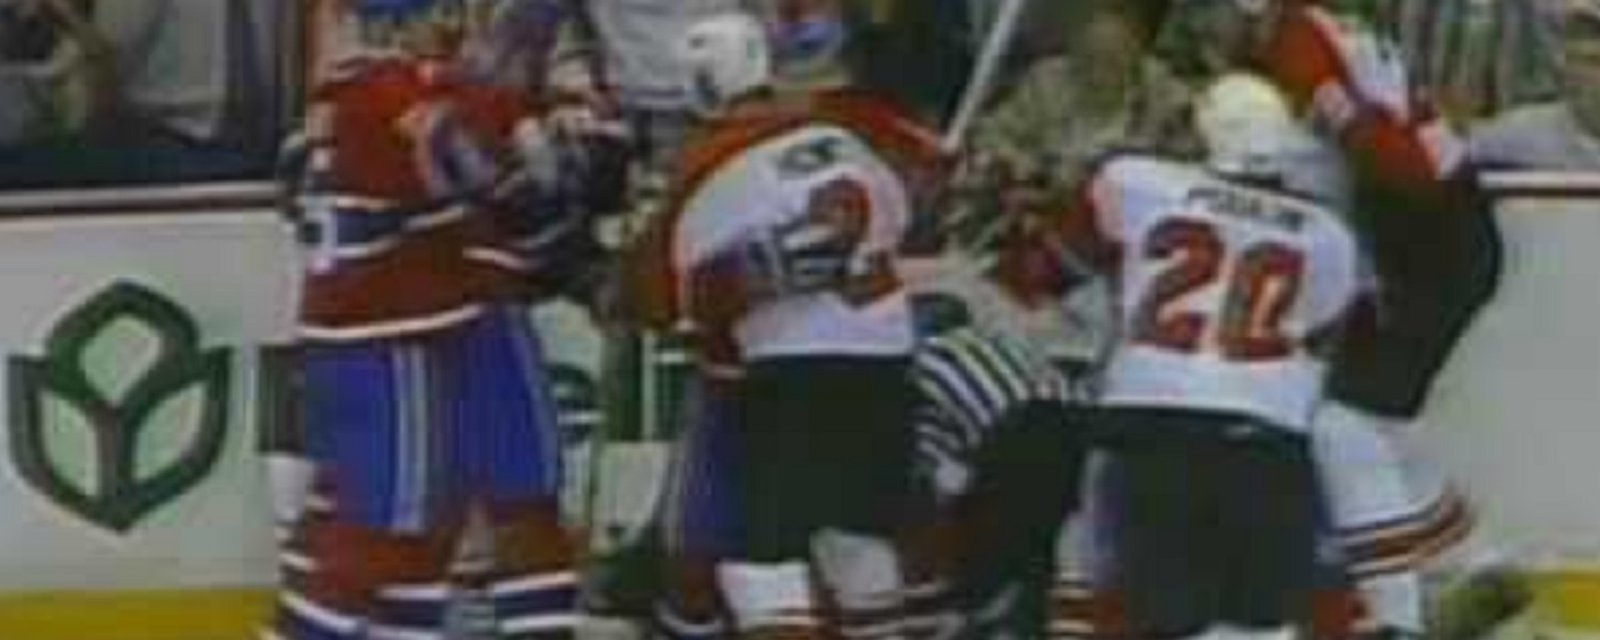 Throwback: May 11th, 1989. Hextall goes crazy and attacks Chris Chelios.